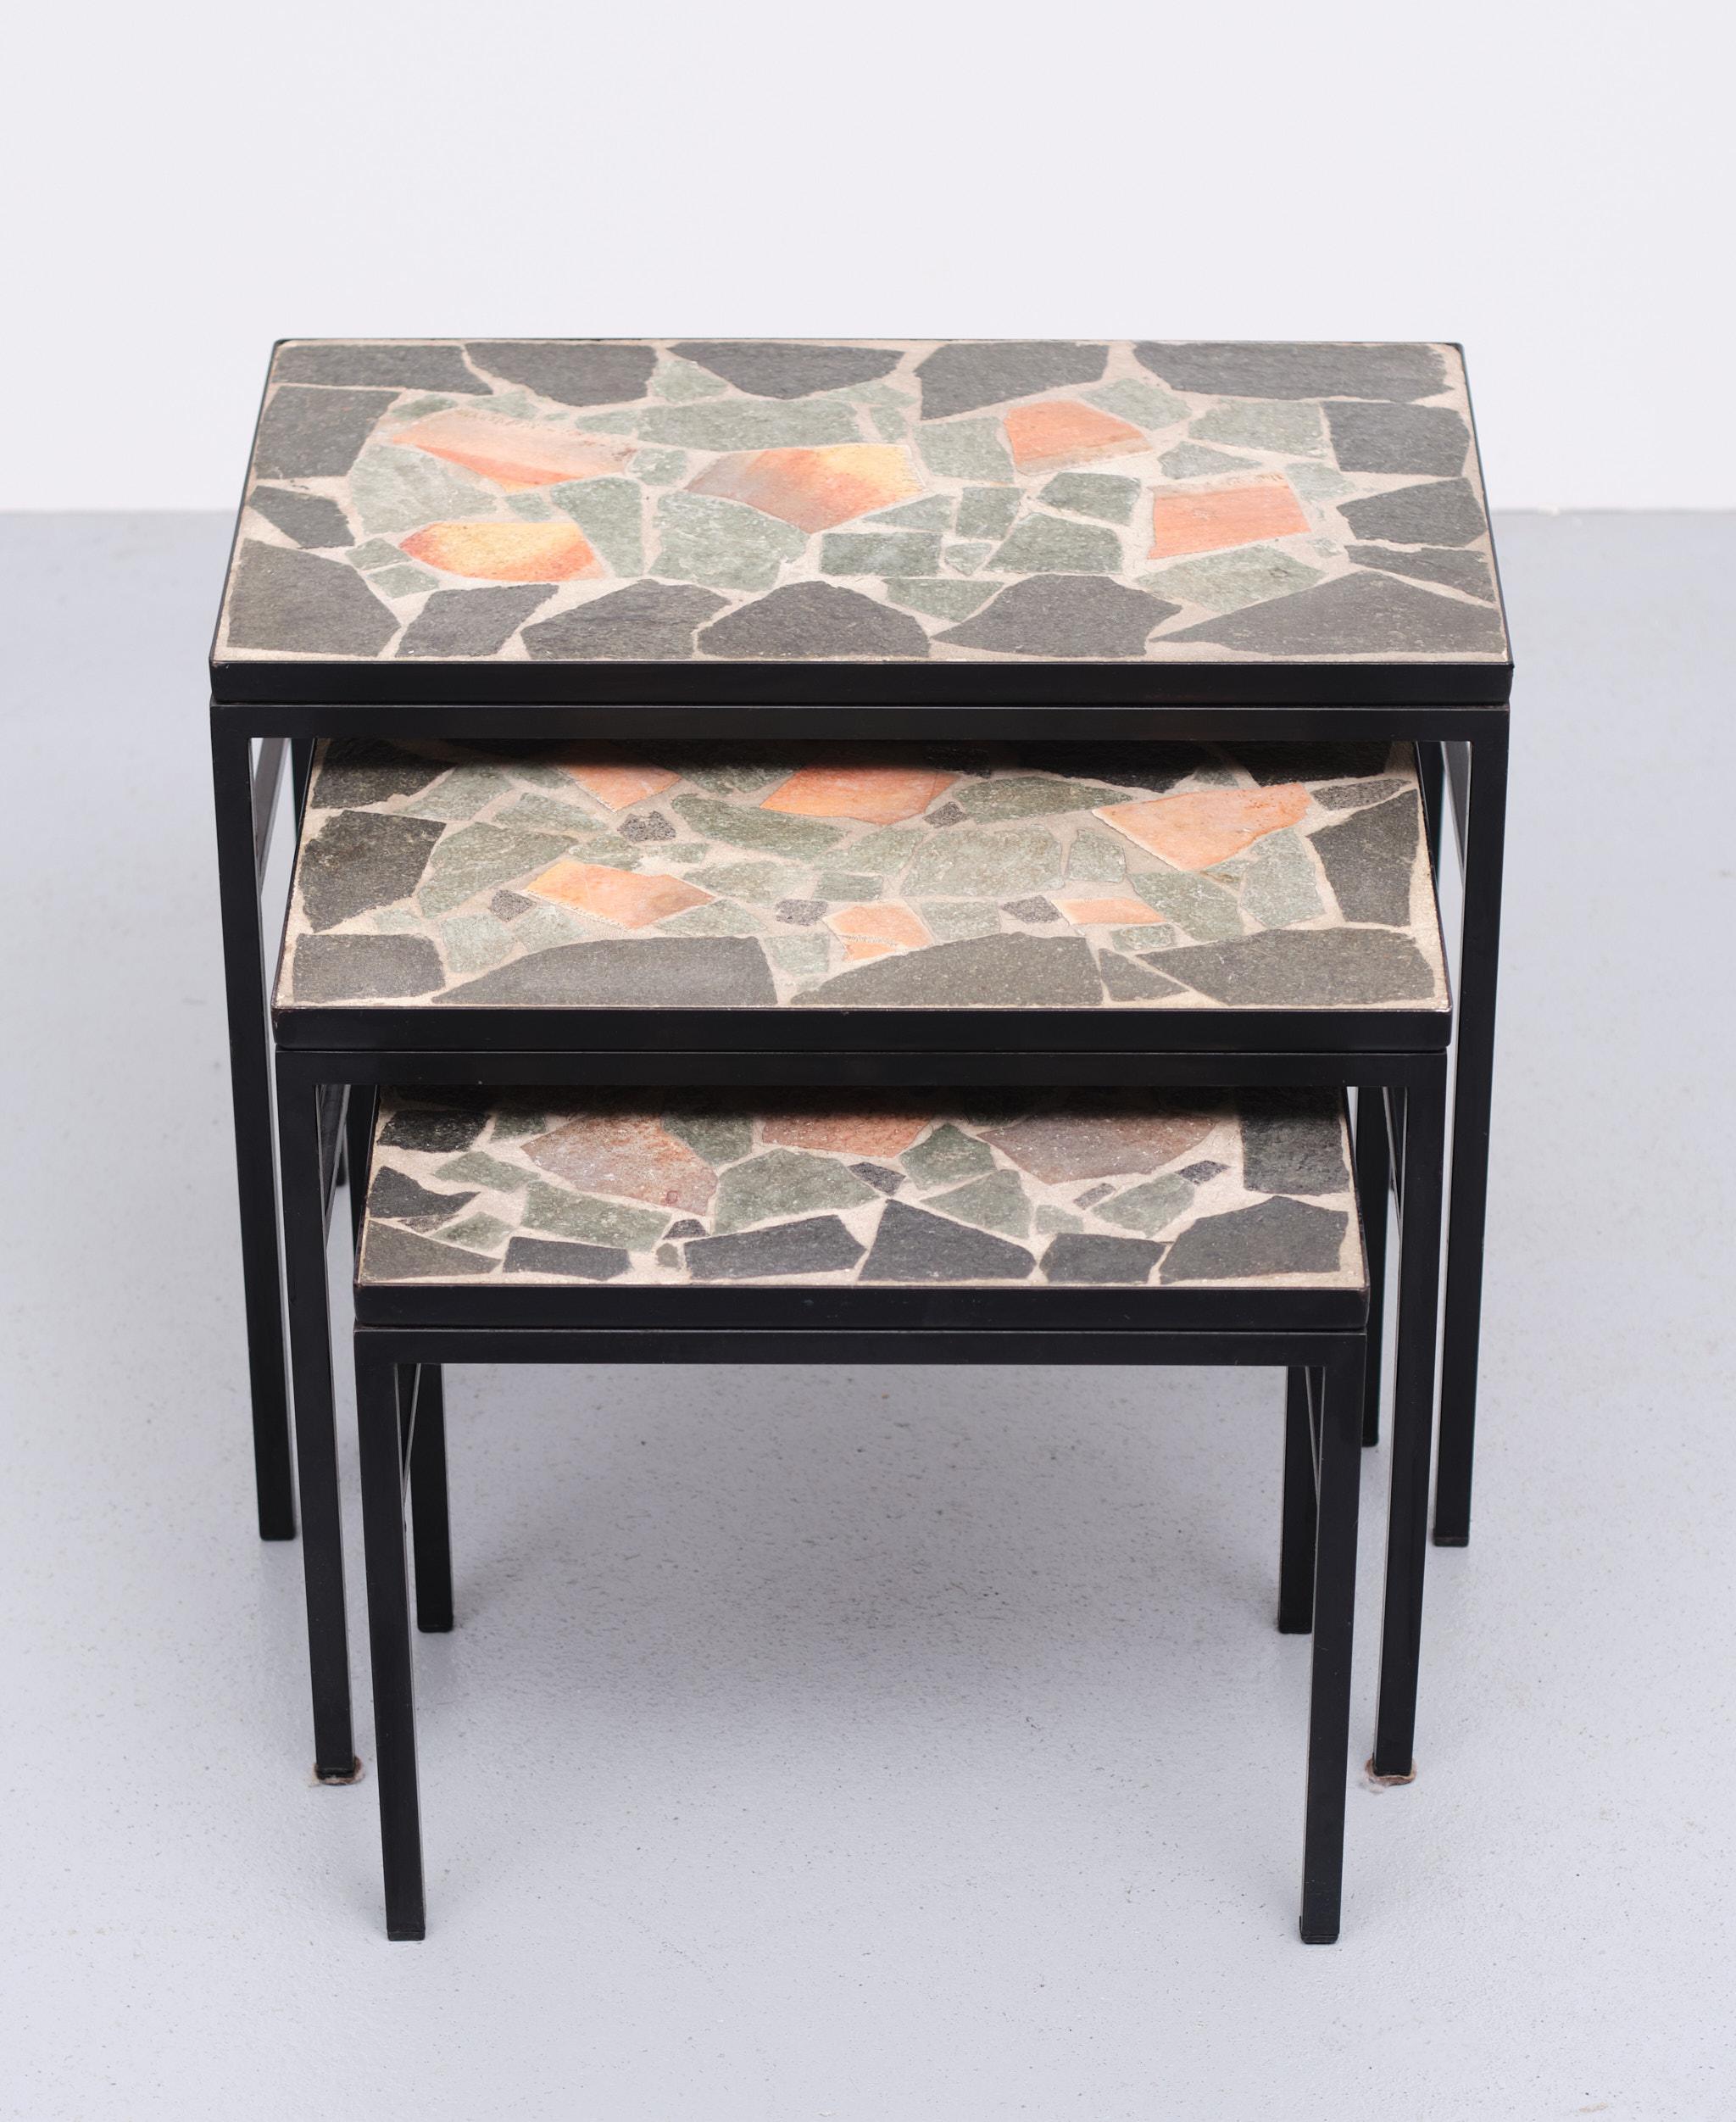 Very nice set of Three brutalist Nesting table. Stone inlay, in grey and red colors,
Black metal frame. Very good condition. 
 Measures: height 43 cm width 52 cm depth 31 cm
height 37 cm width 45 cm depth 27 cm
height 31 cm width 38 cm depth 23